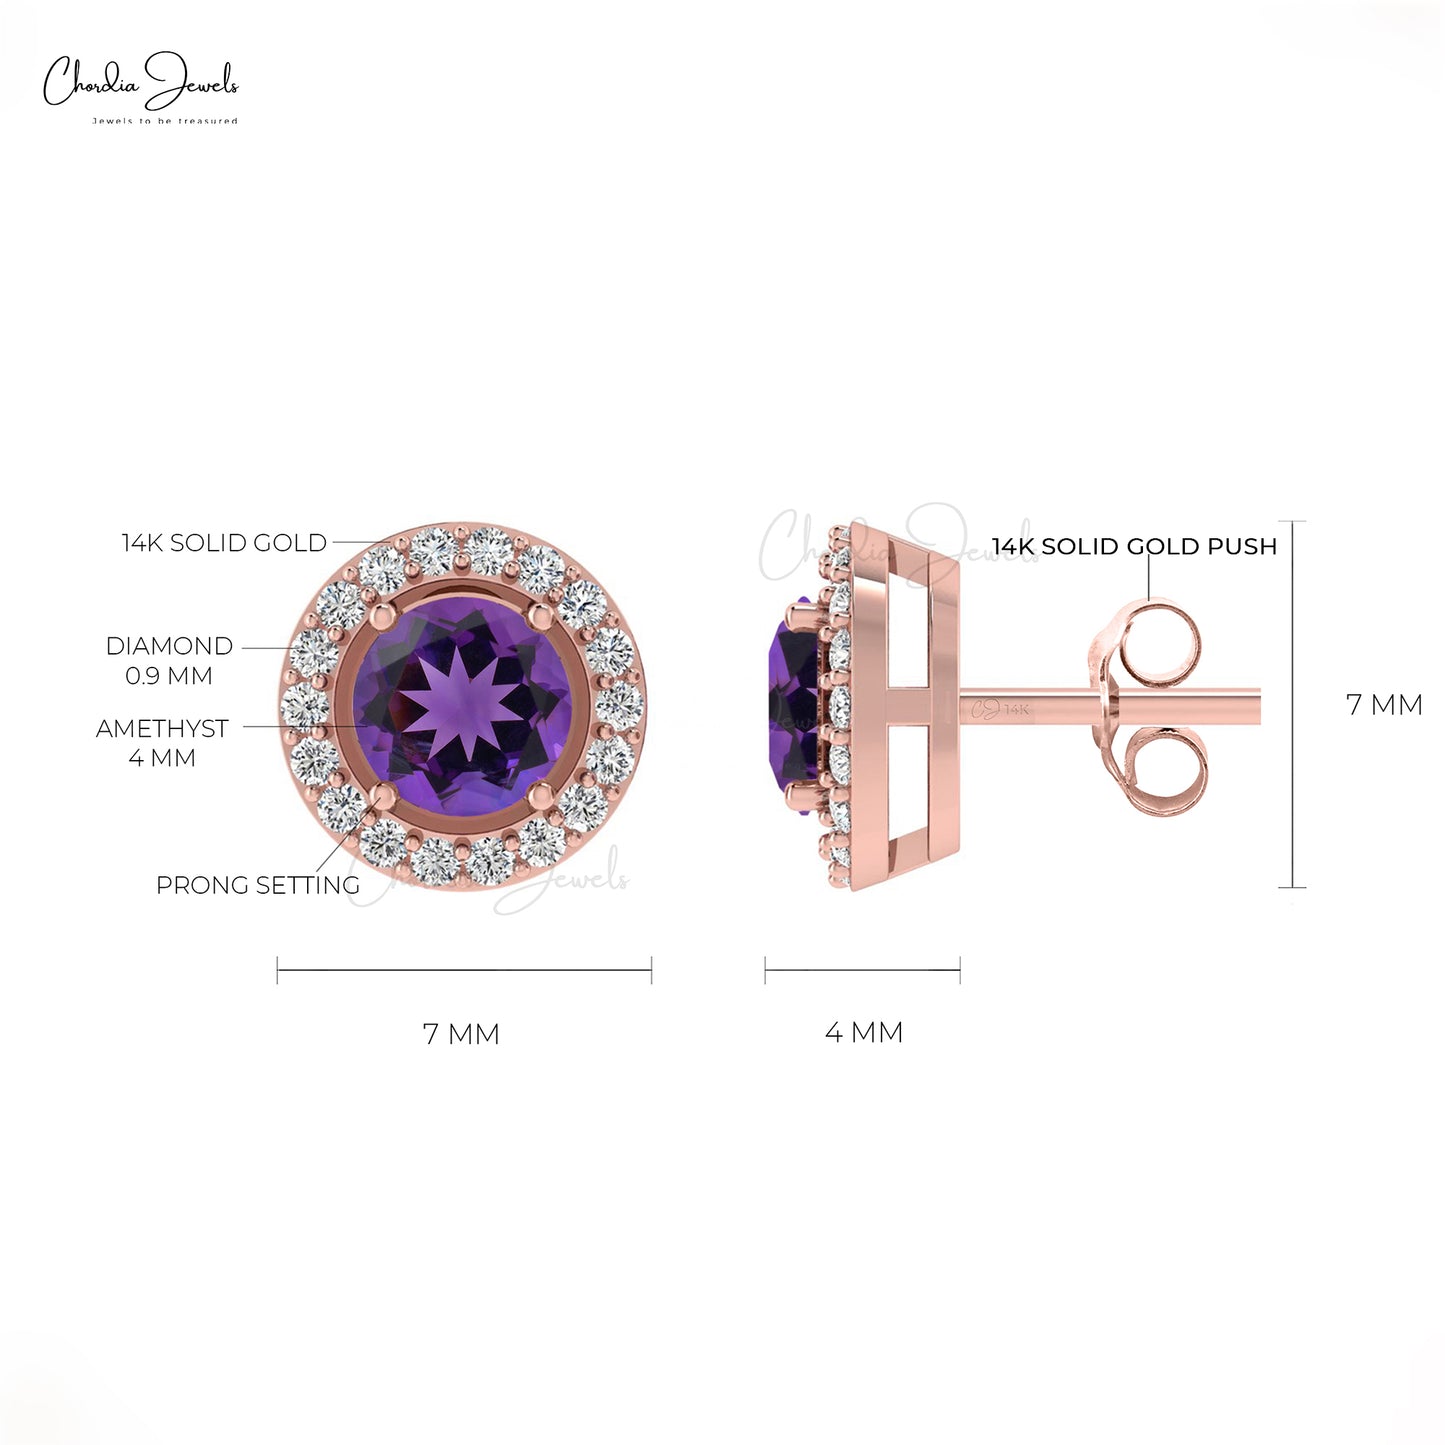  amethyst stud earrings in 14k Rose Gold with Round White Diamond 